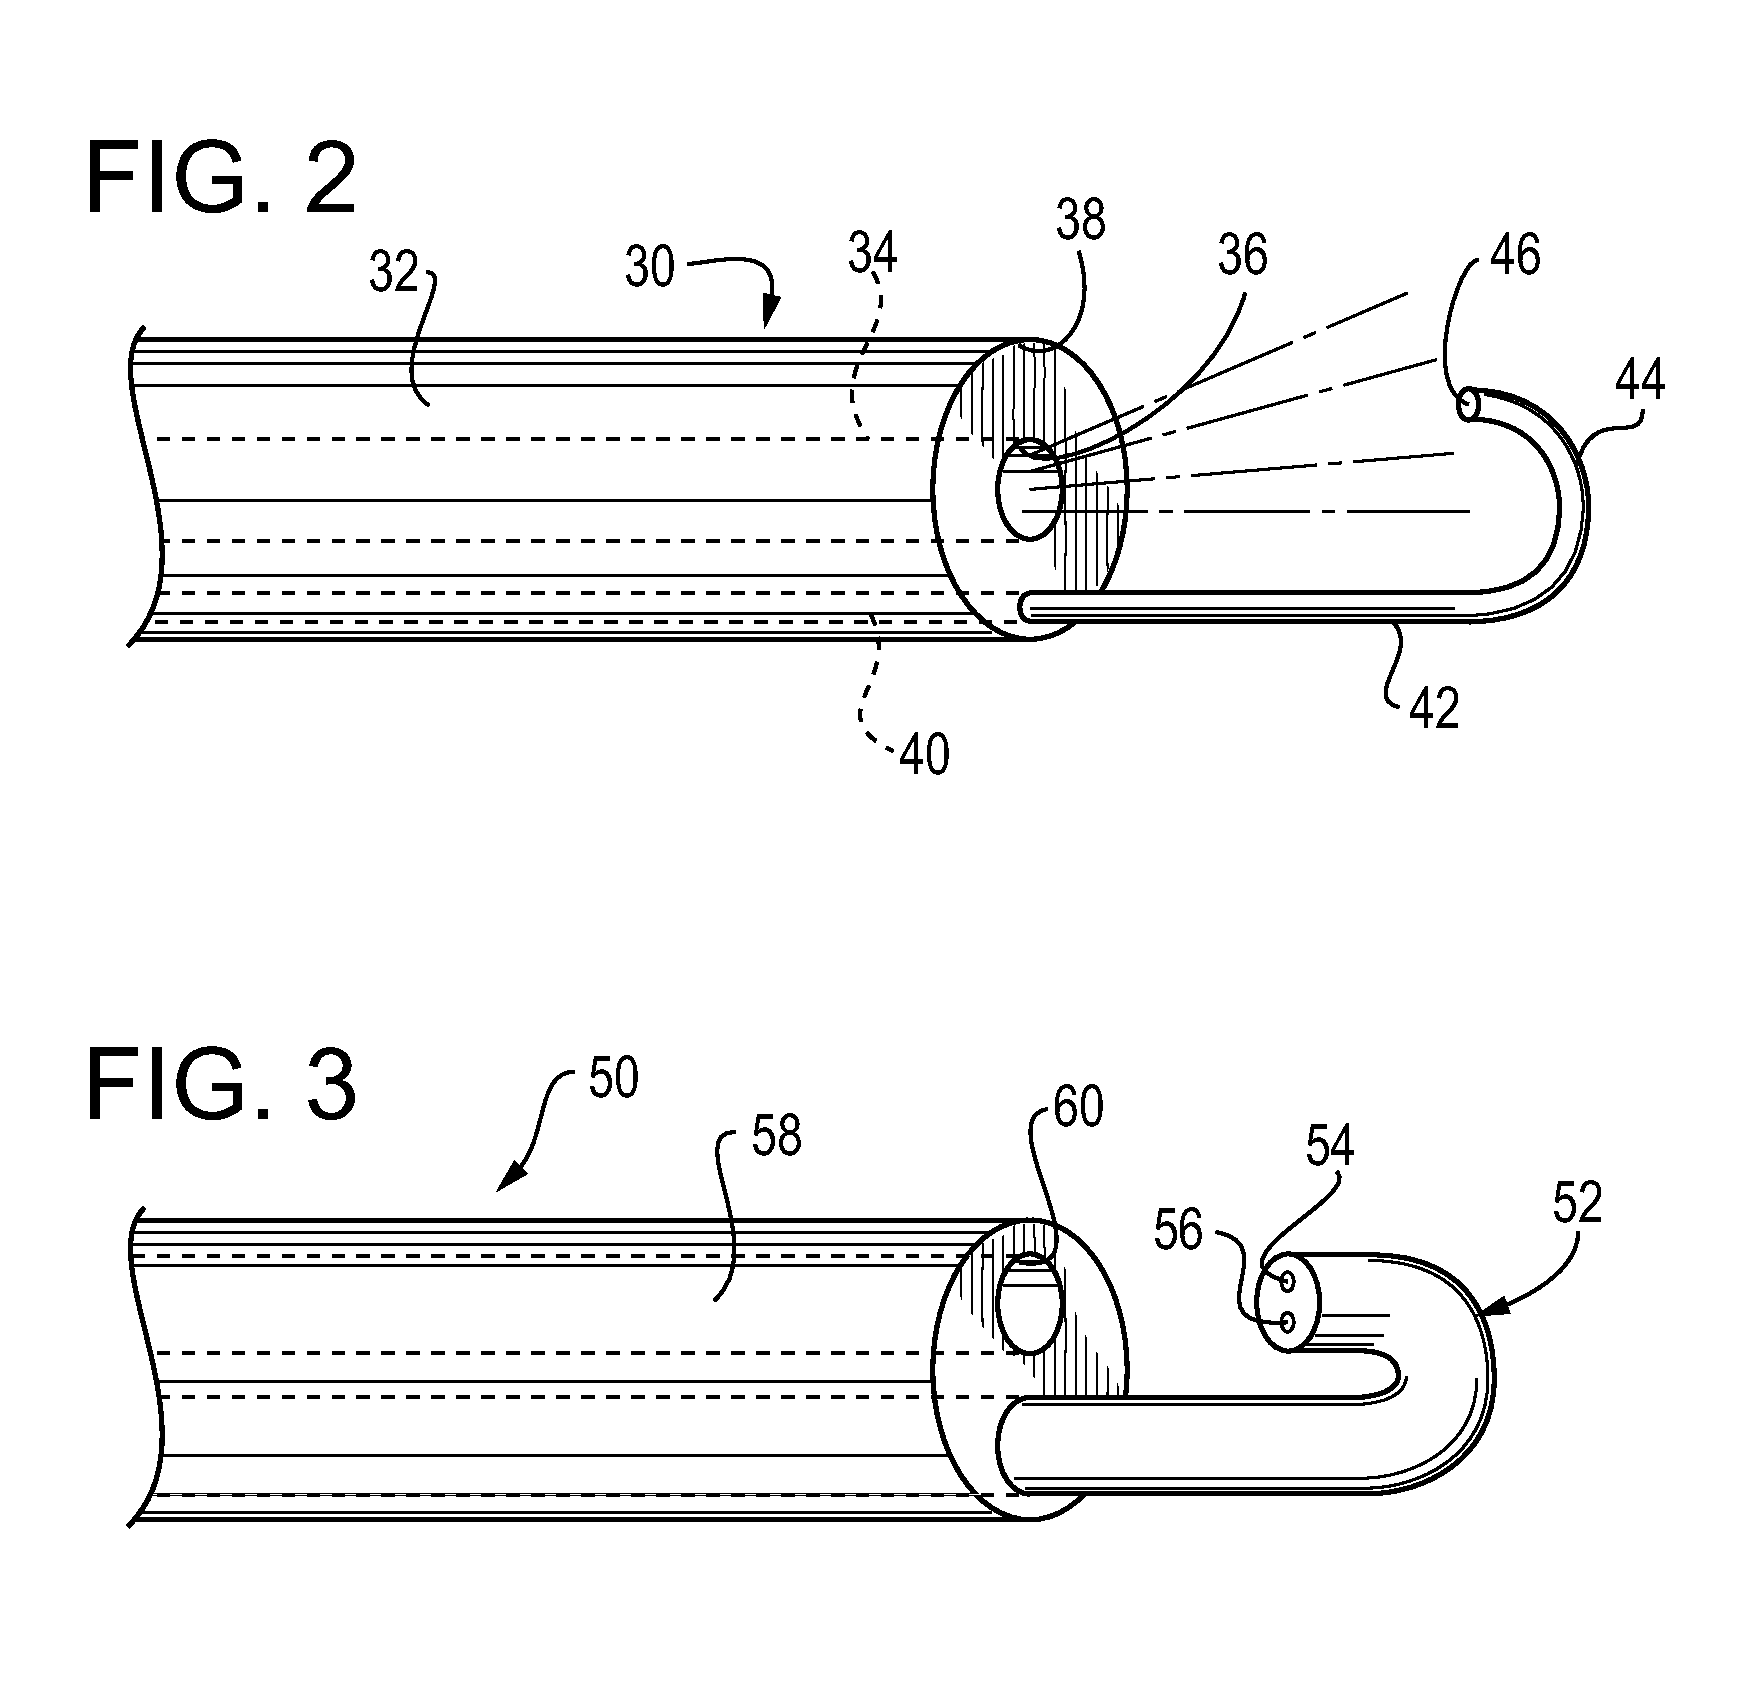 System and method for delivering an Anti-adhesive substance to a body cavity